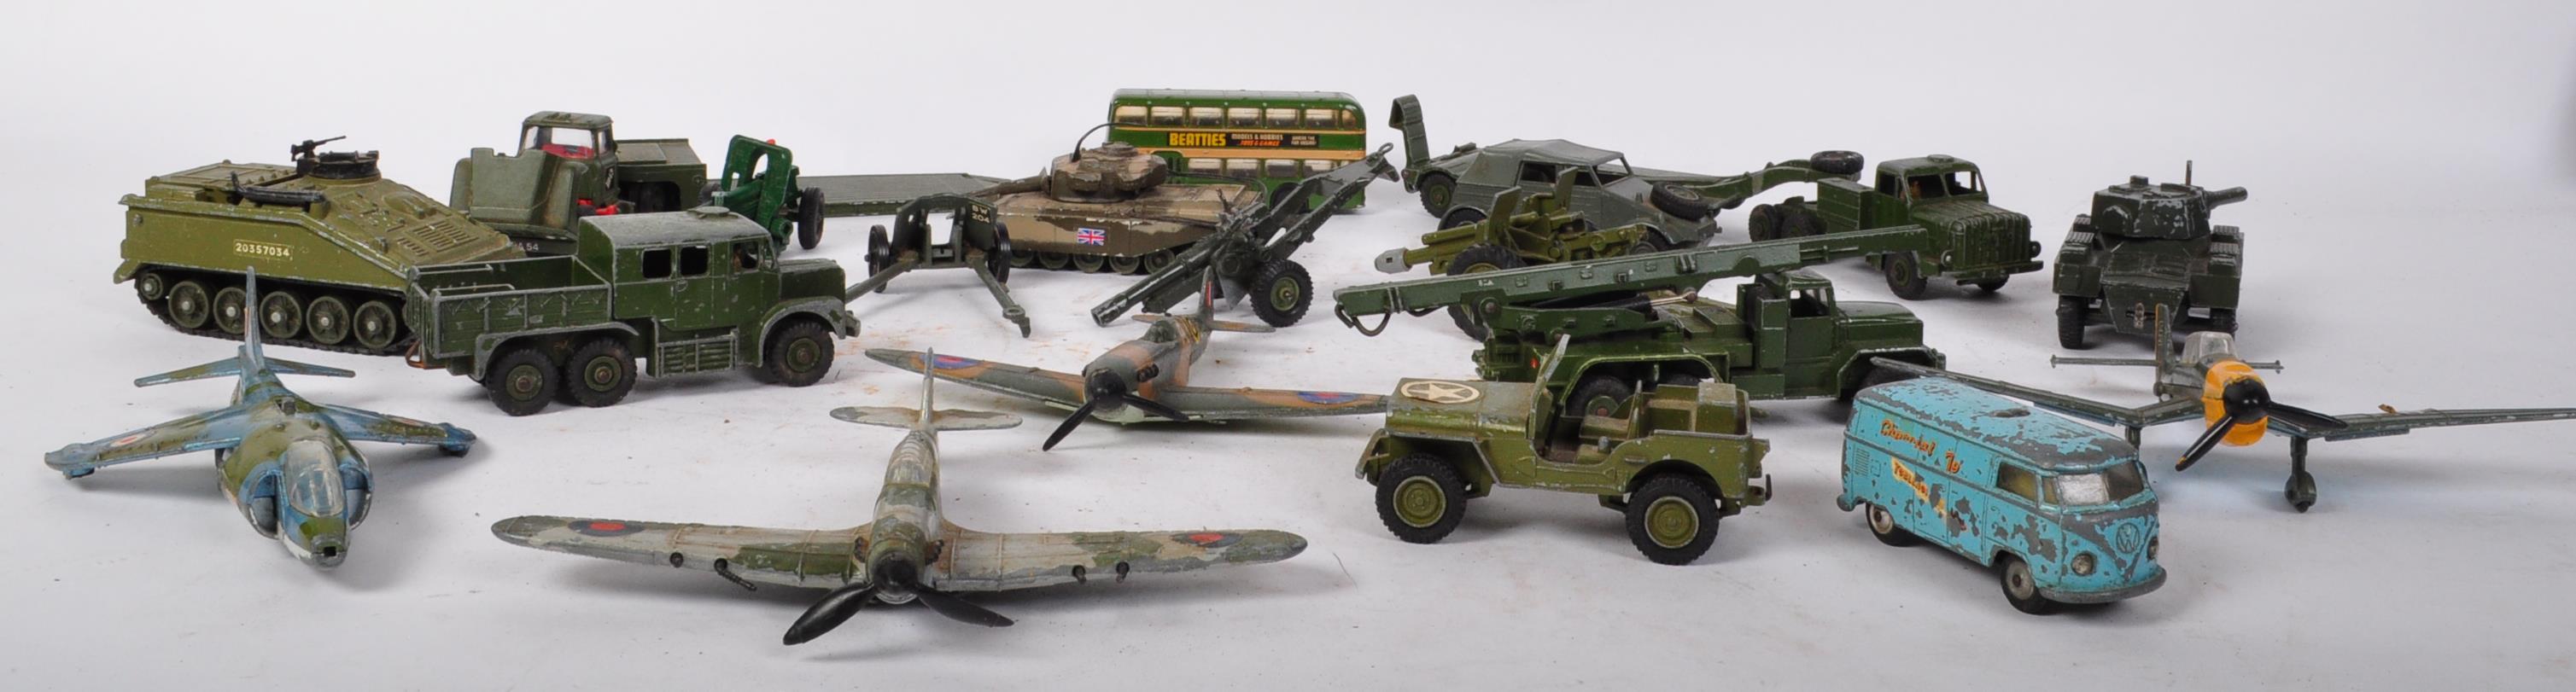 A COLLECTION OF VINTAGE MILITARY STYLE TOYS - CORGI - DINKY & MORE - Image 3 of 11